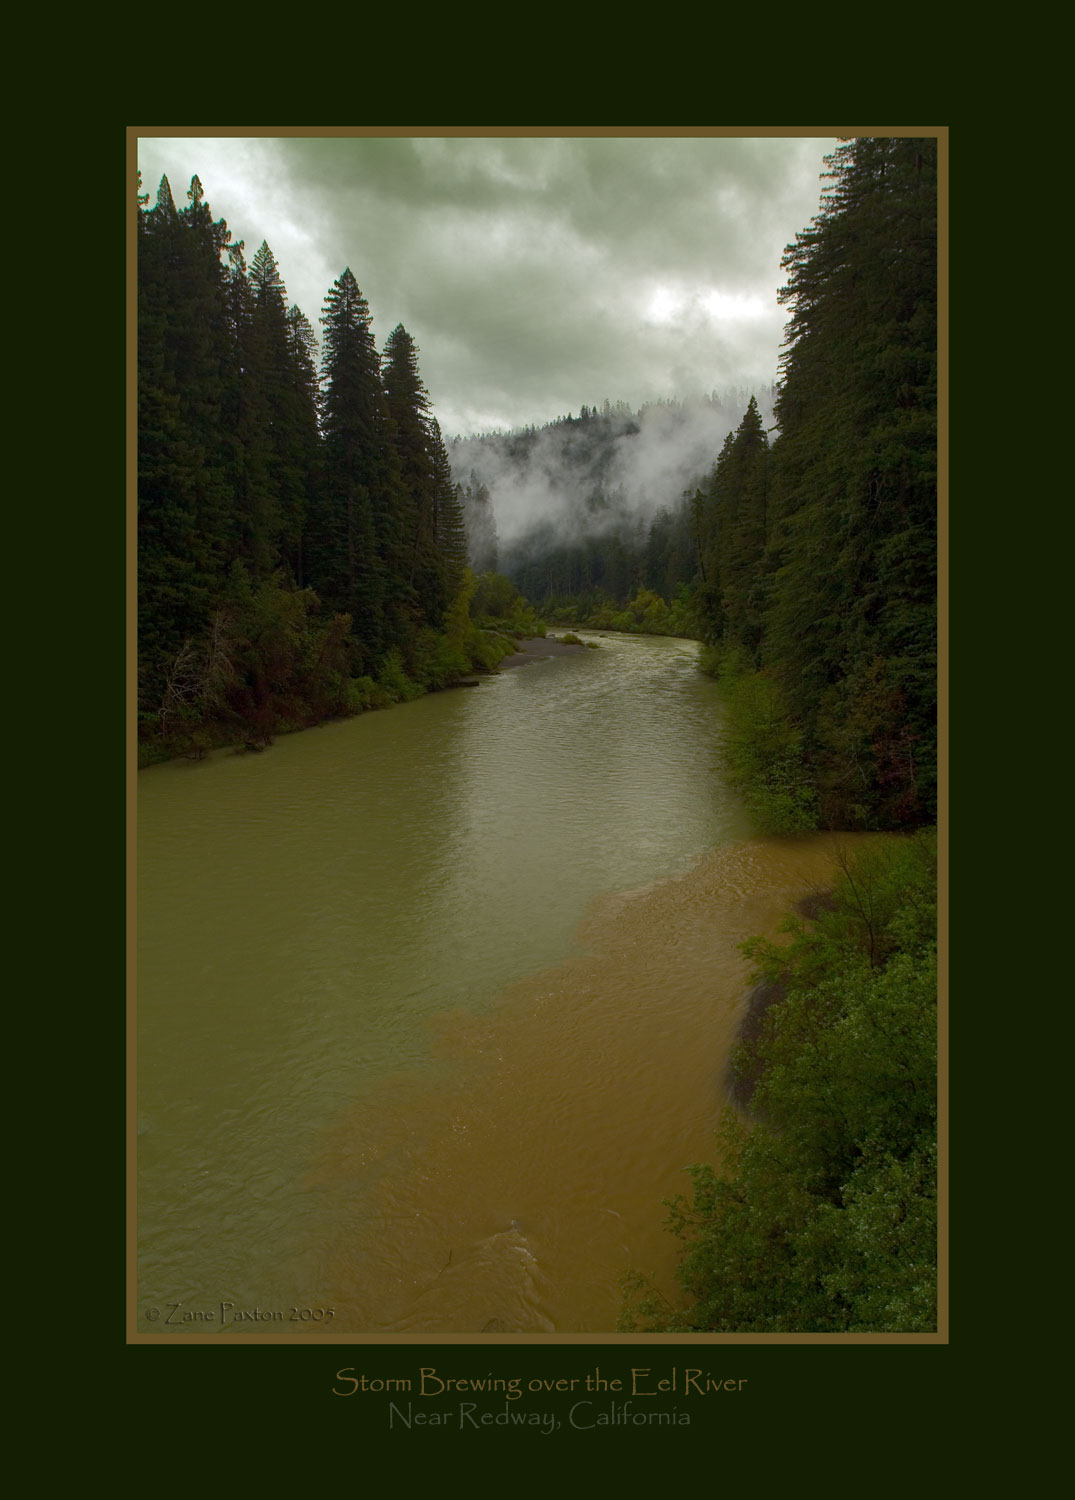 Storm Brewing over the Eel River